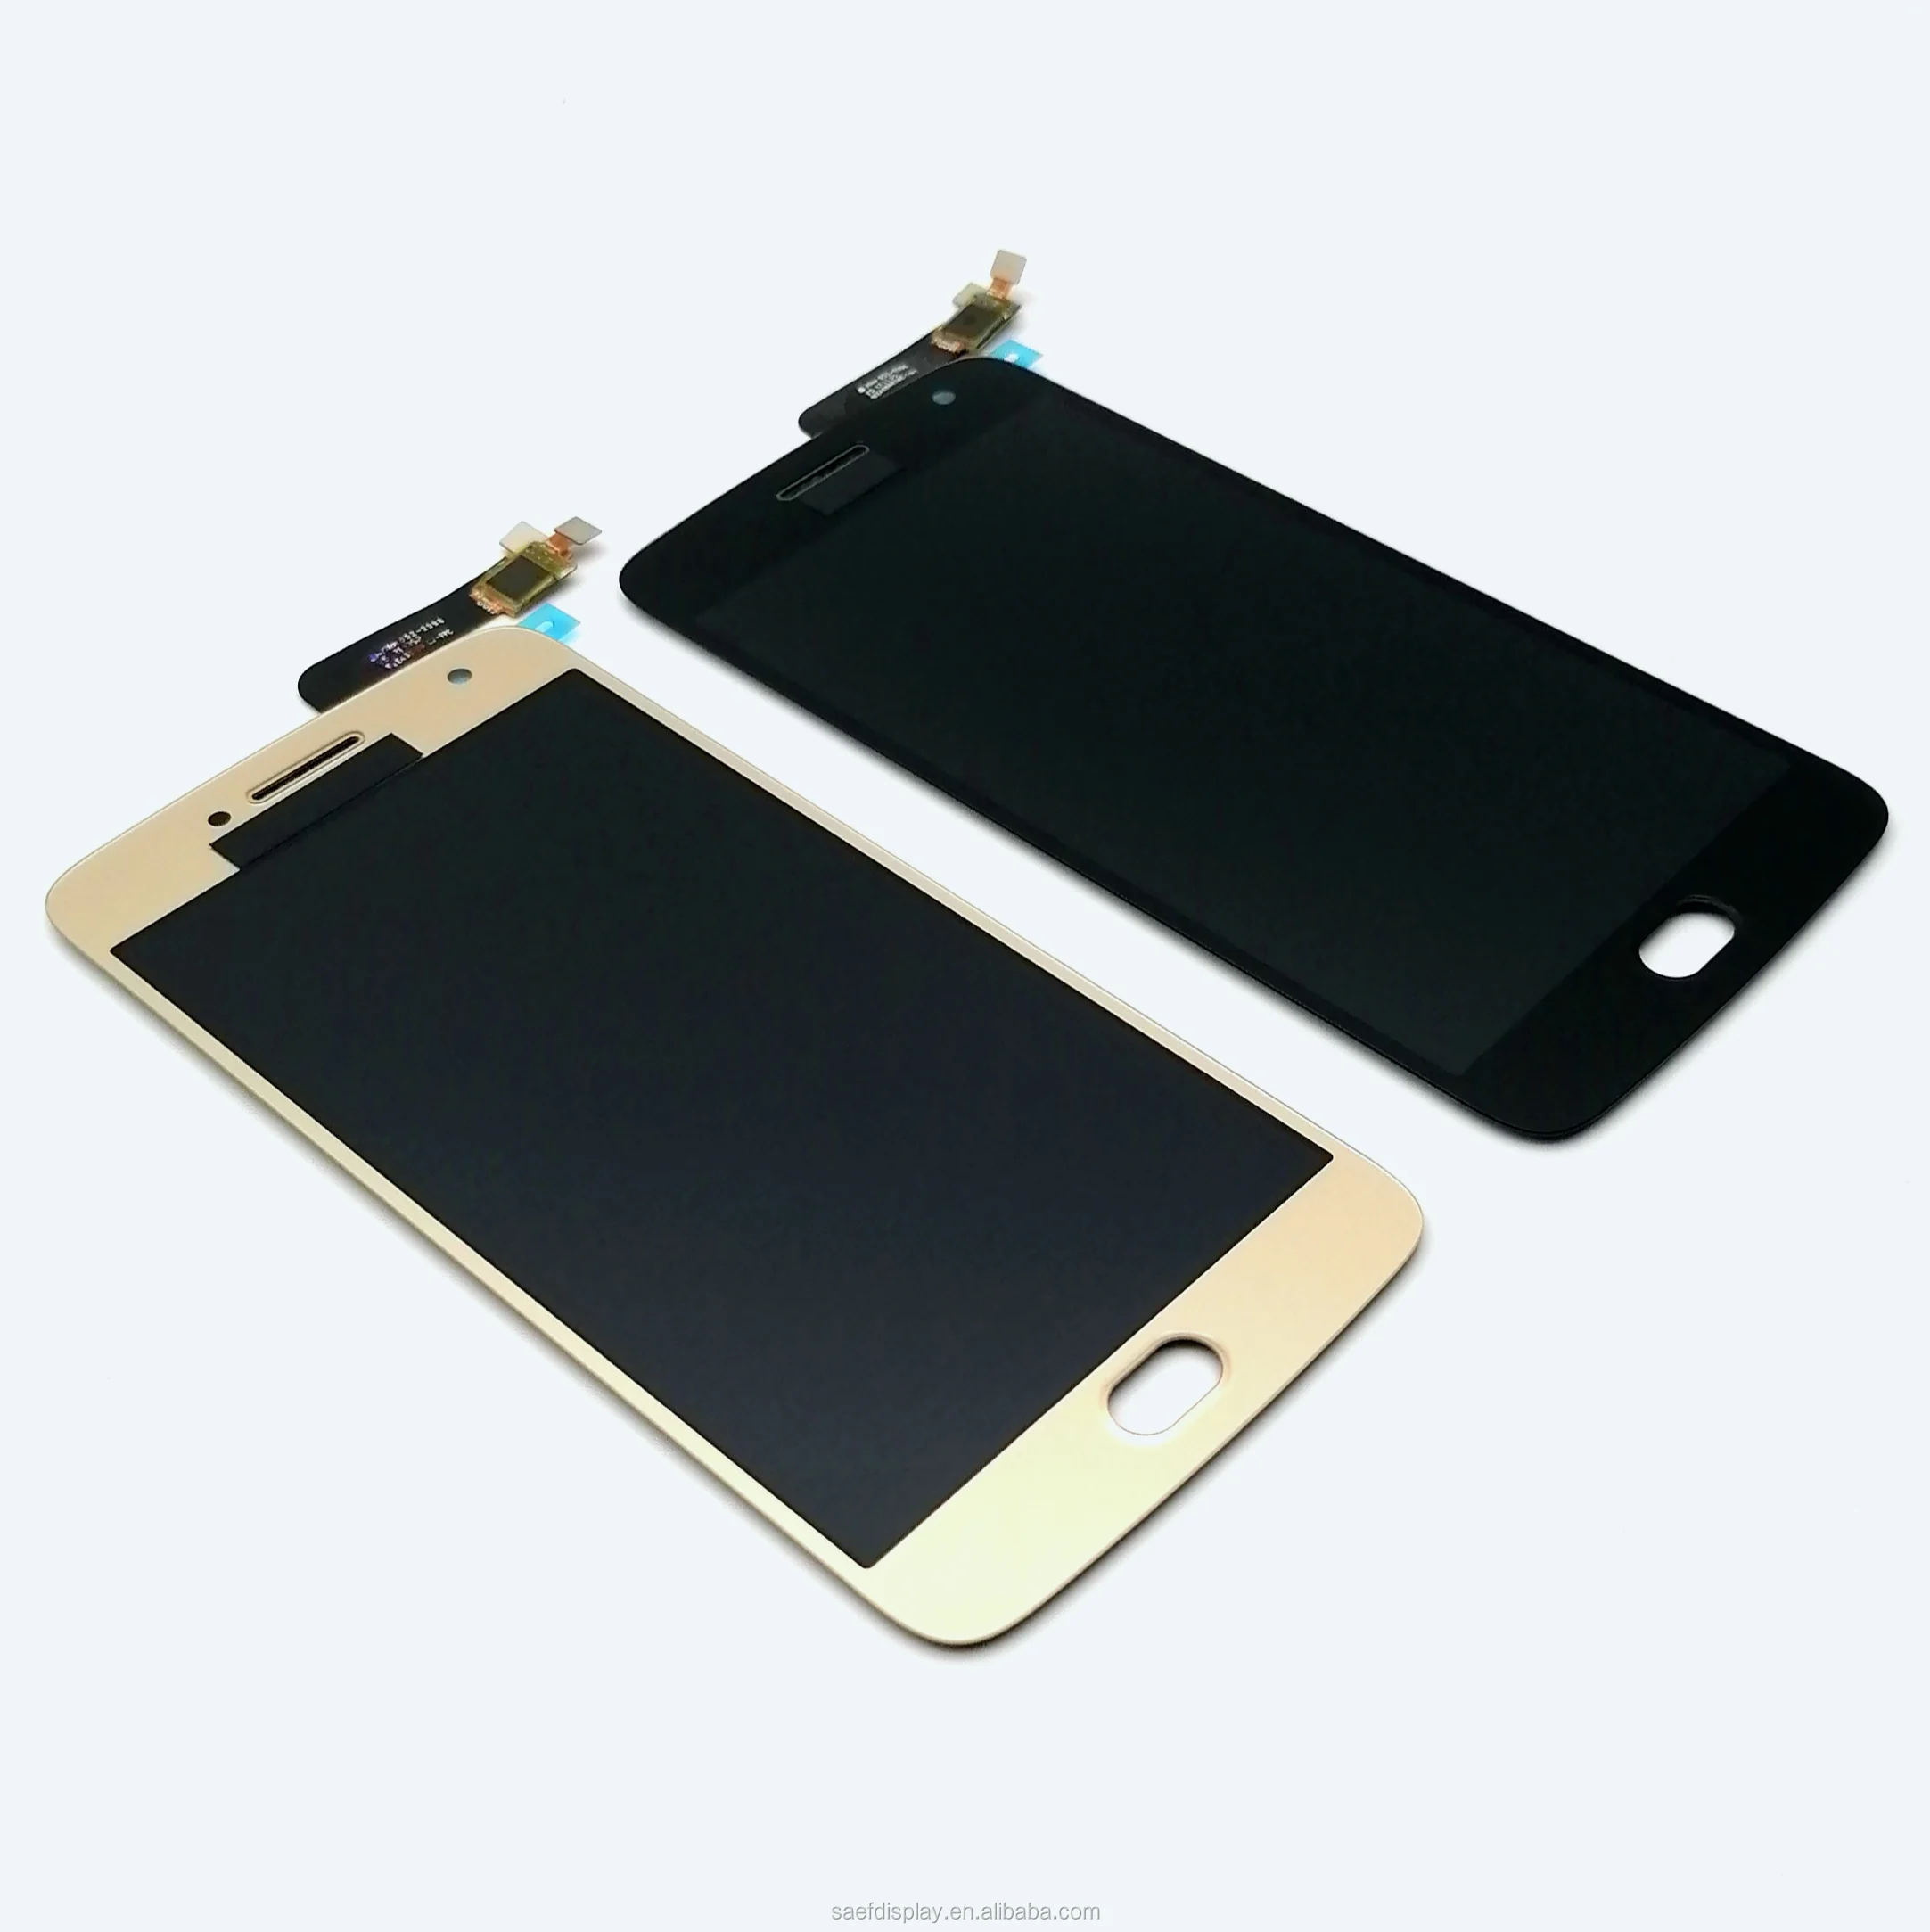 

G5 Plus LCD Screen Replacement Touch Display Digitizer Assembly 5.2" (Black) for Motorola Moto G5 Plus XT1686 XT1681 XT1683